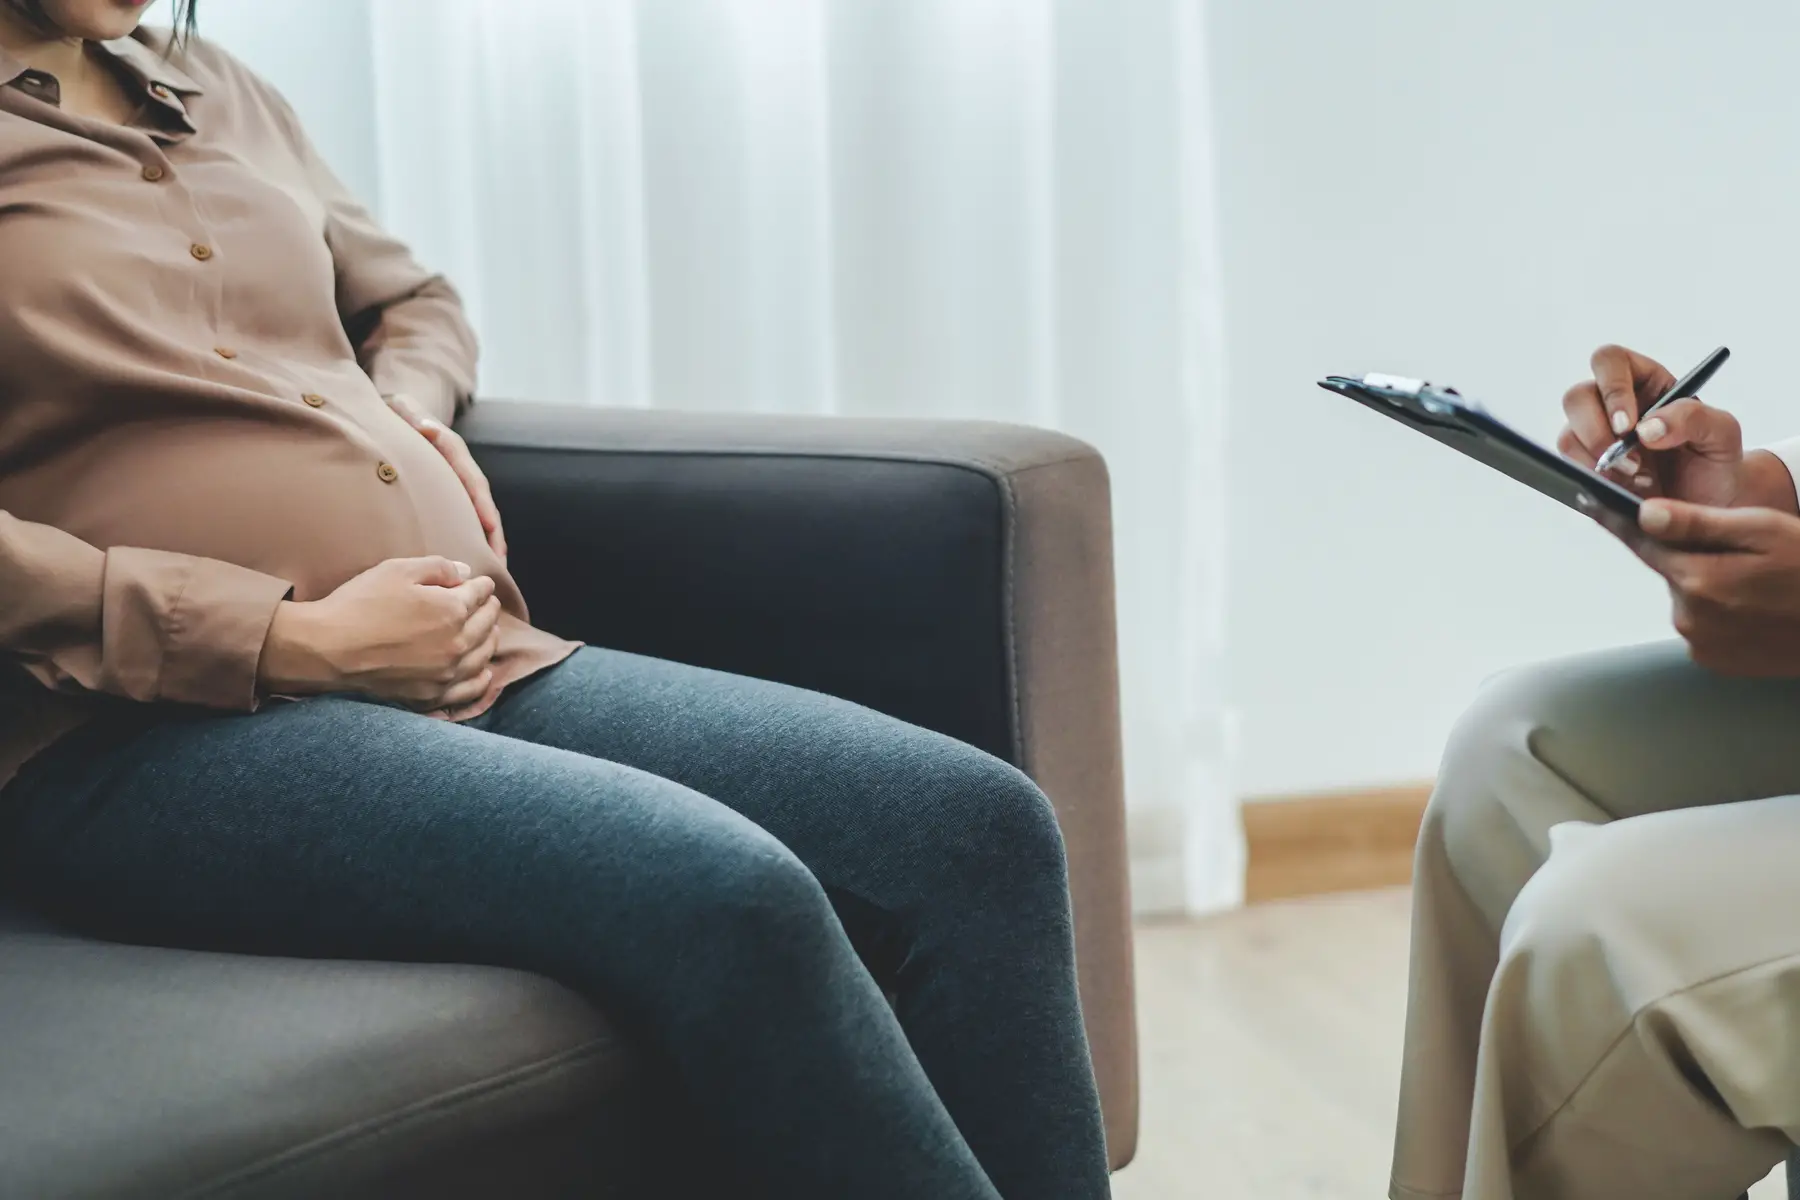 Qatar mental healthcare for special groups like pregnant women